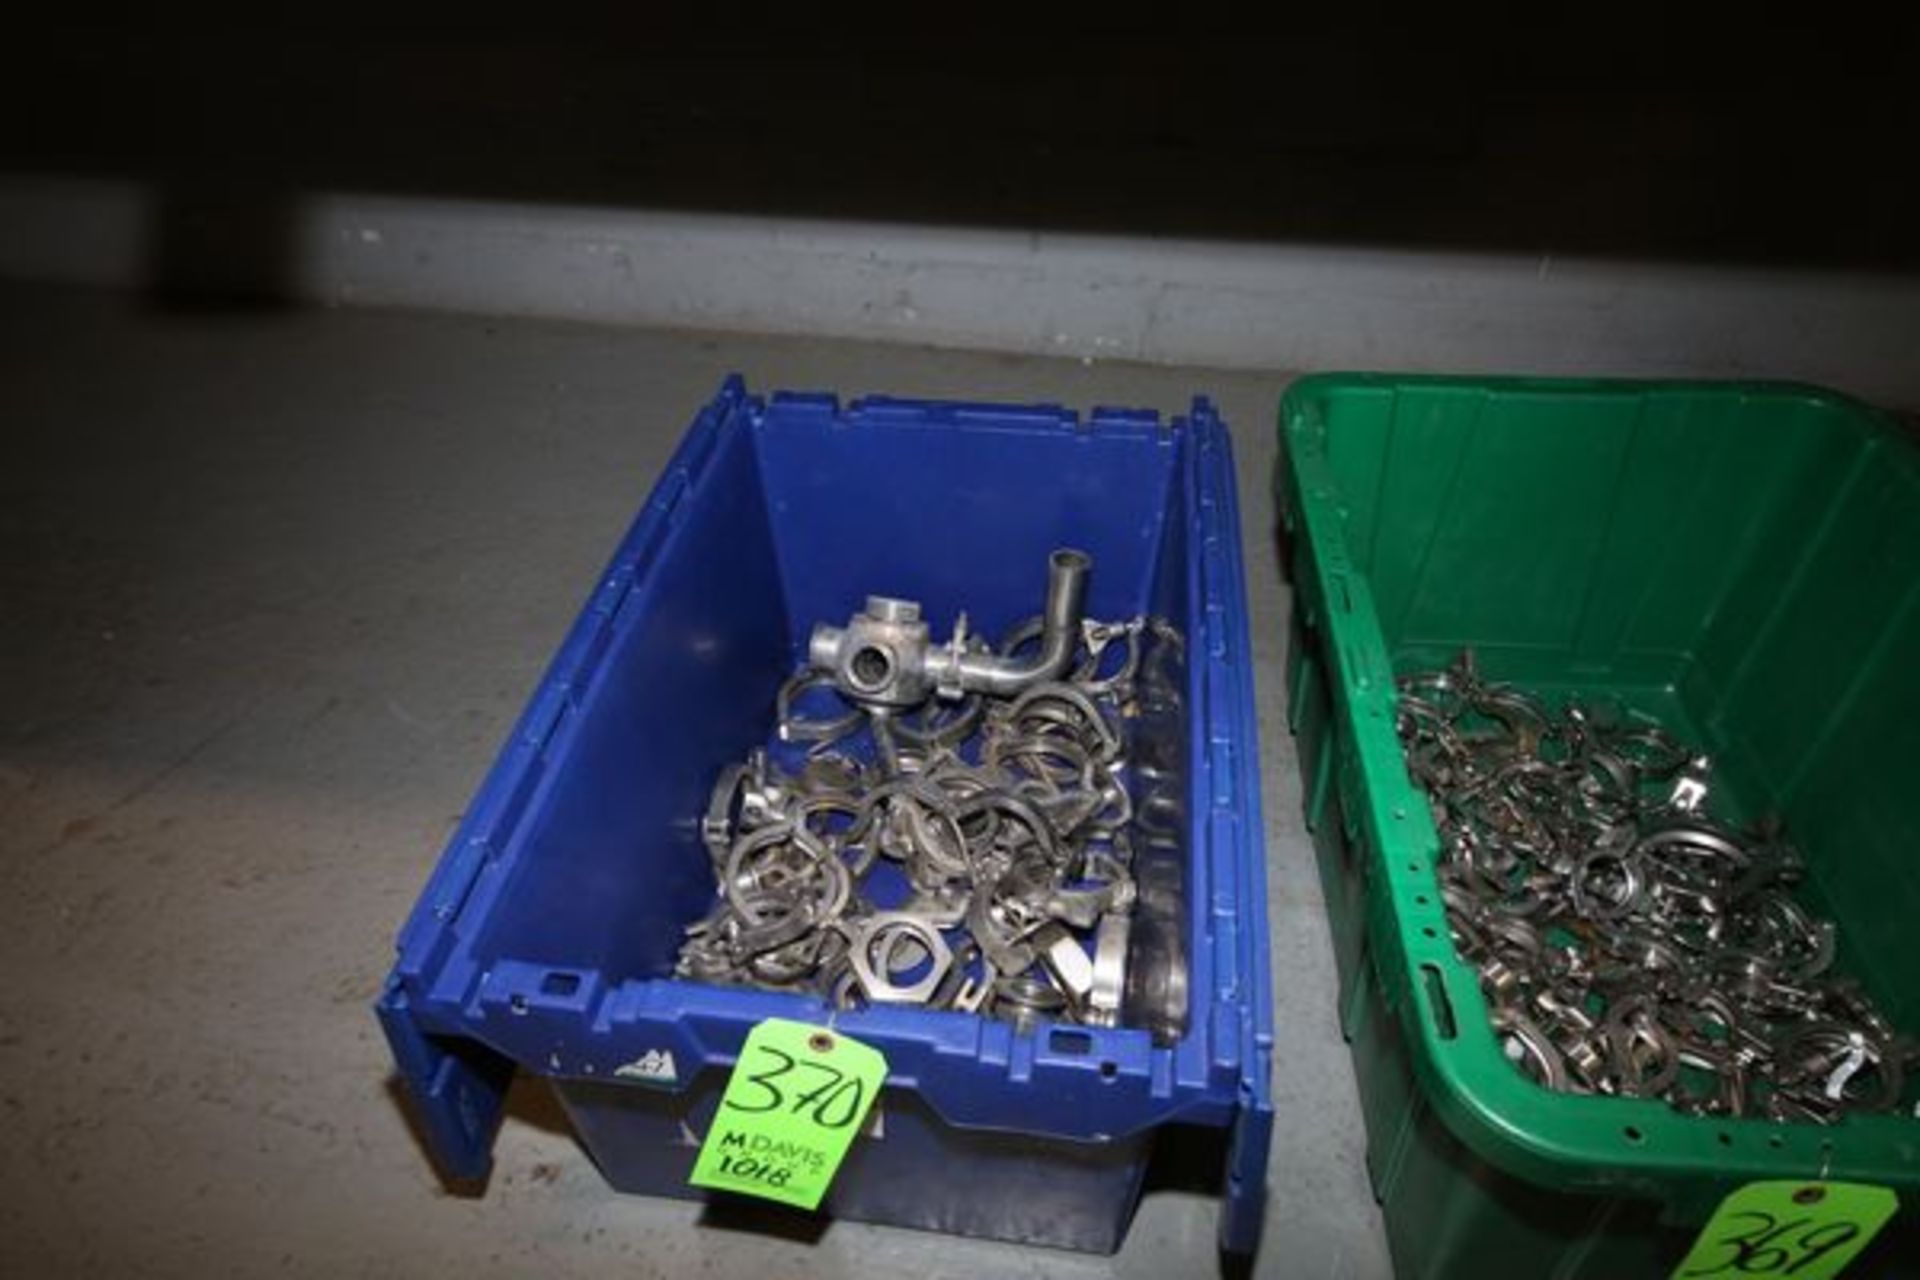 Lot of Assorted S/S Fittings, Including Clamps, Plugg Valves, and Other Fittings